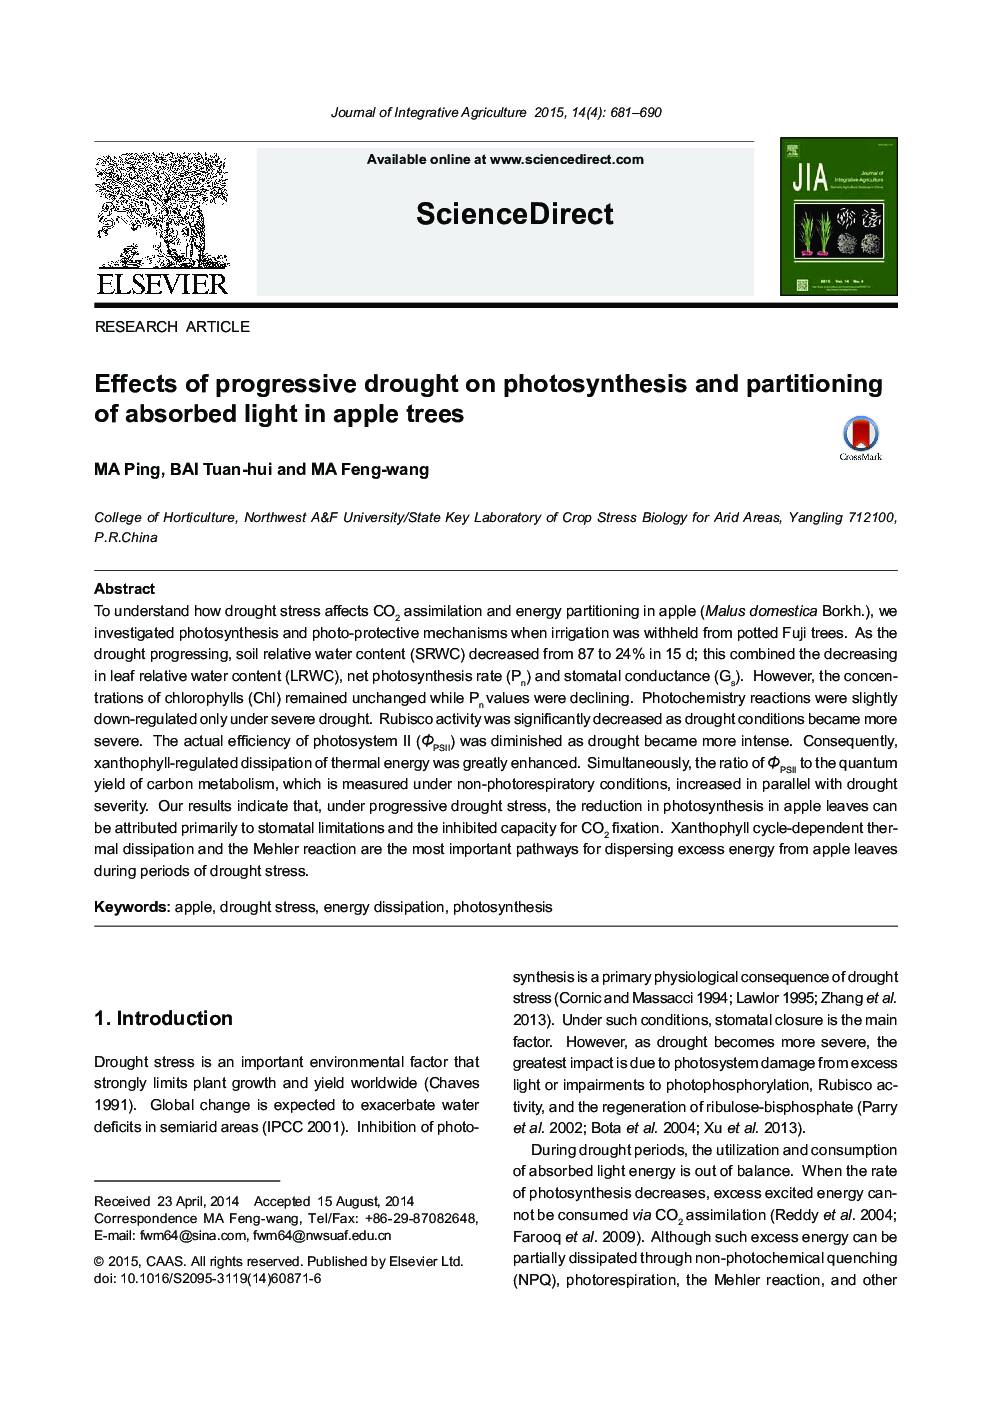 Effects of progressive drought on photosynthesis and partitioning of absorbed light in apple trees